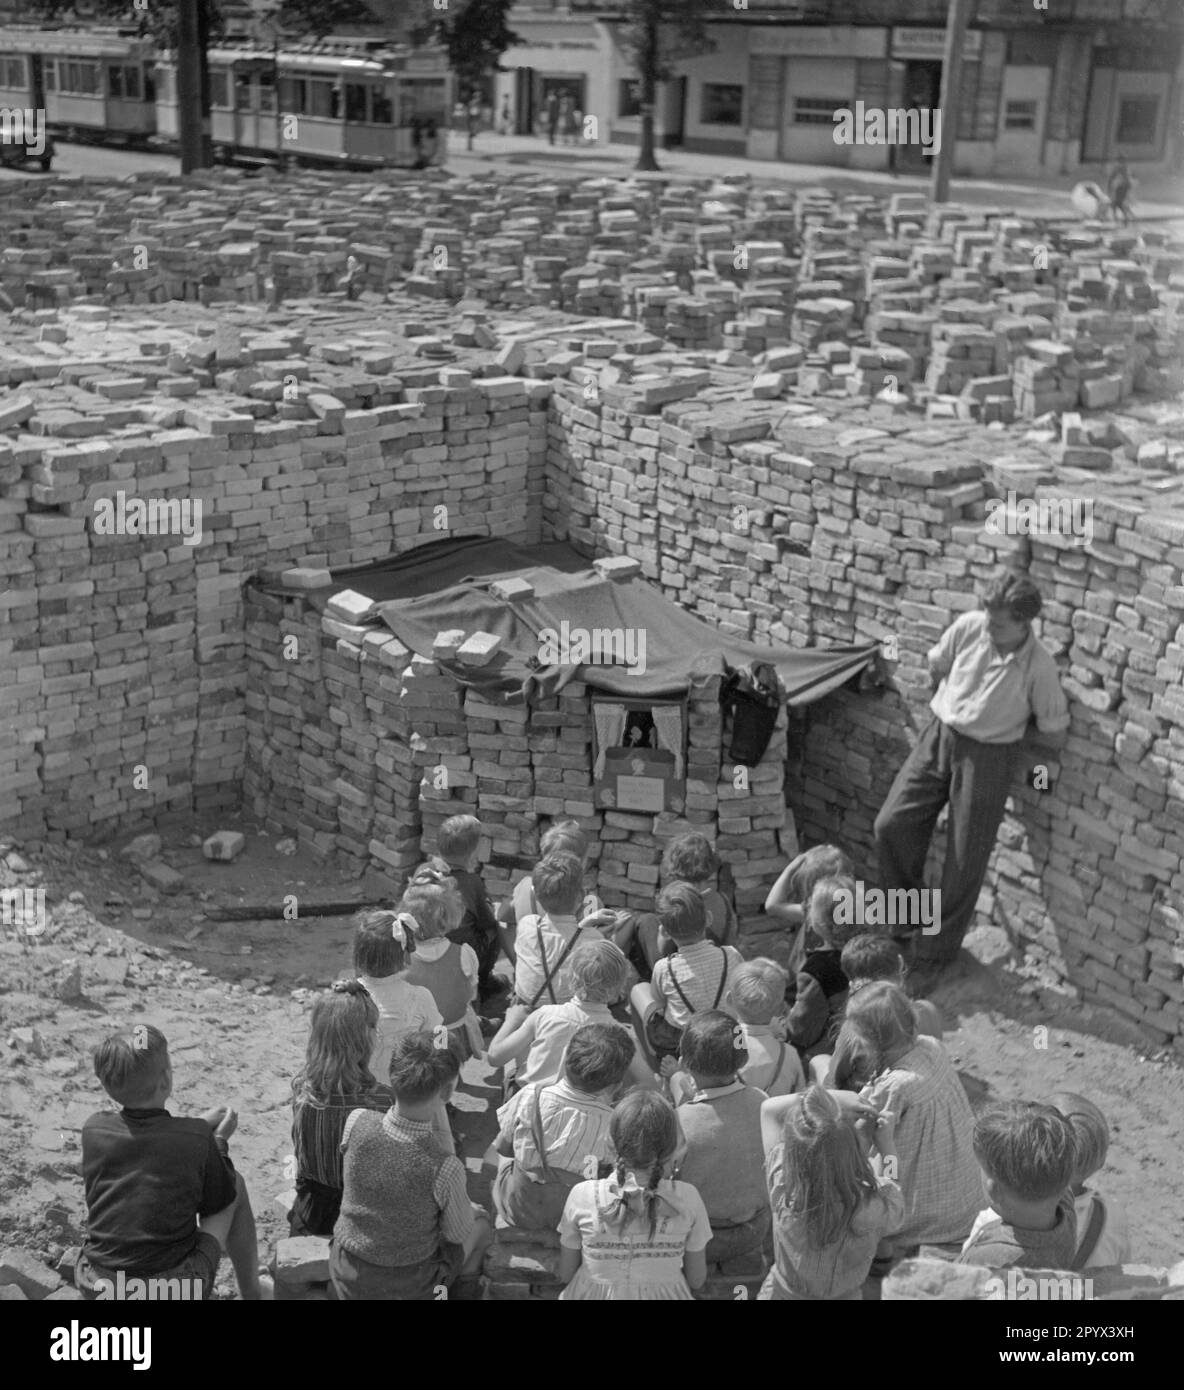 Undated photo of a group of children watching a puppet show among piles of bricks remnant from the ruins. Bricks serve as curtain of the puppet theater. To the right of the stage, the puppeteer. In the background, more brick stacks and a passing tram. Stock Photo